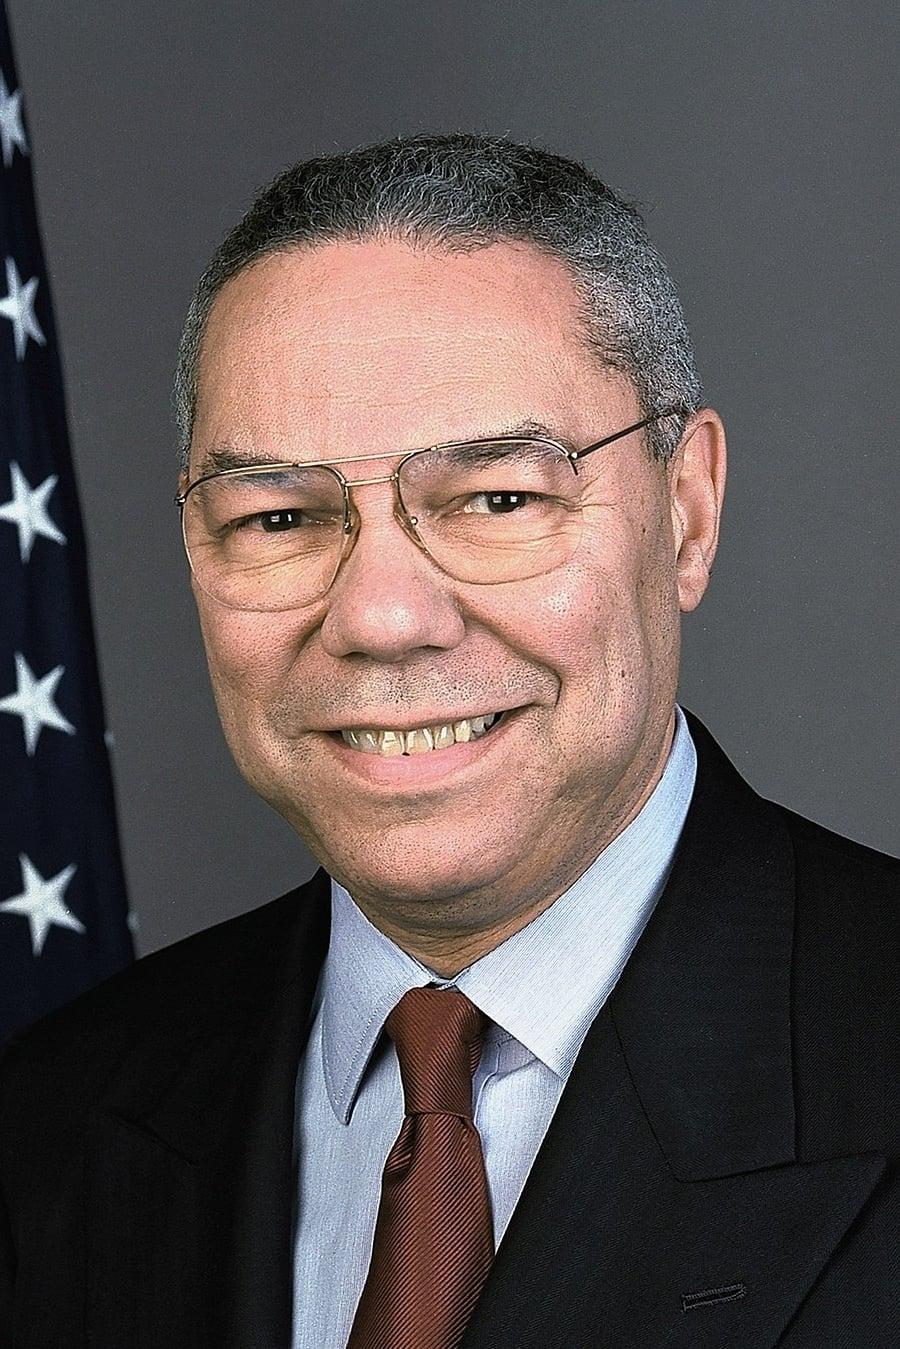 Colin Powell | Self - Former Secretary of State (archive footage)